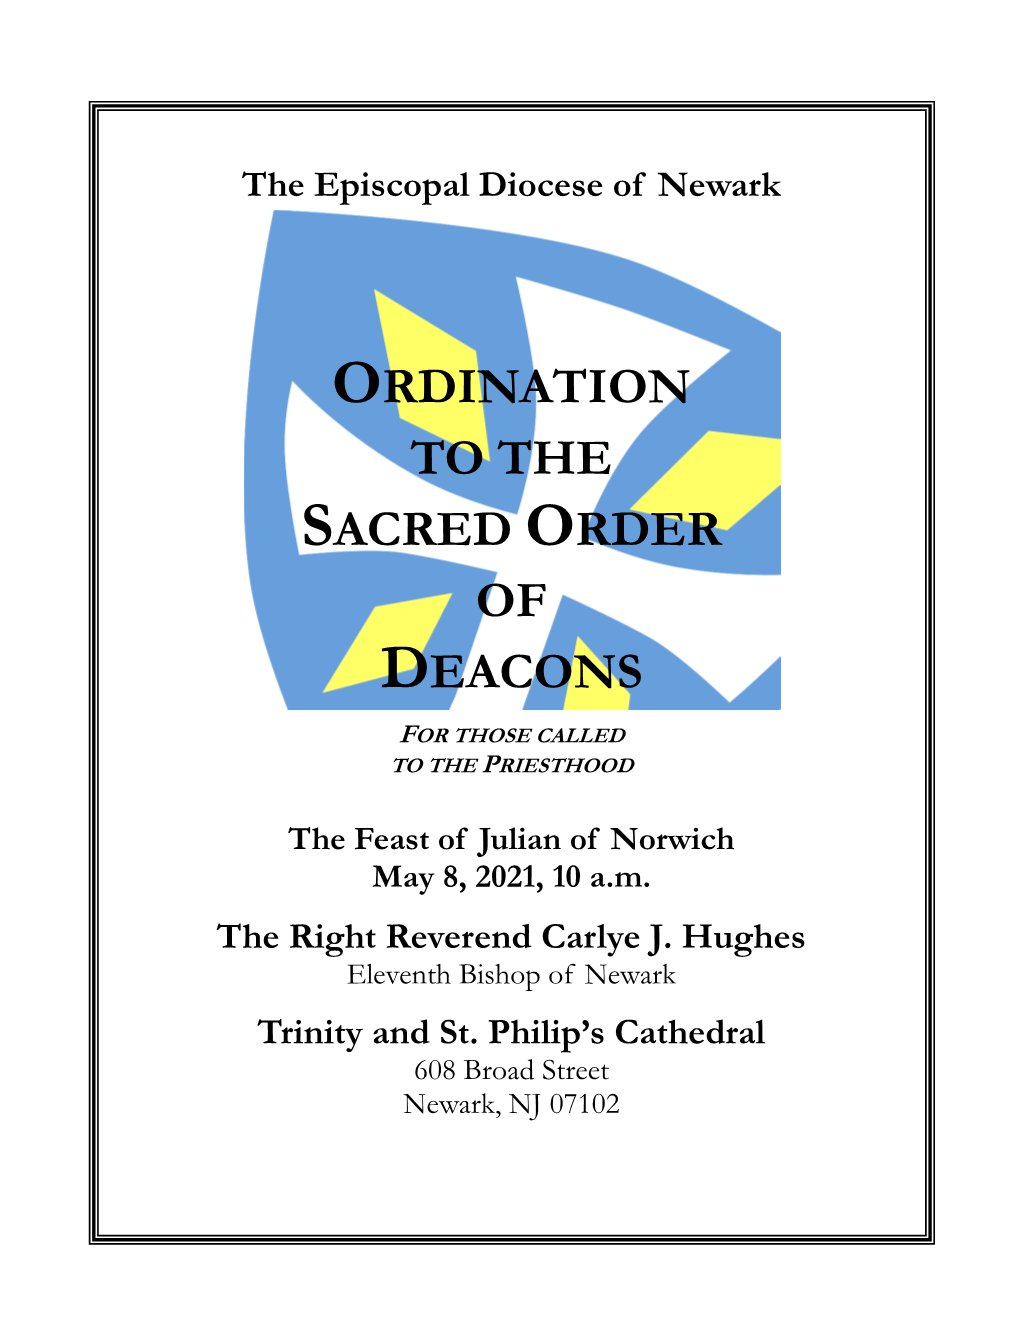 Ordination to the Sacred Order of Deacons